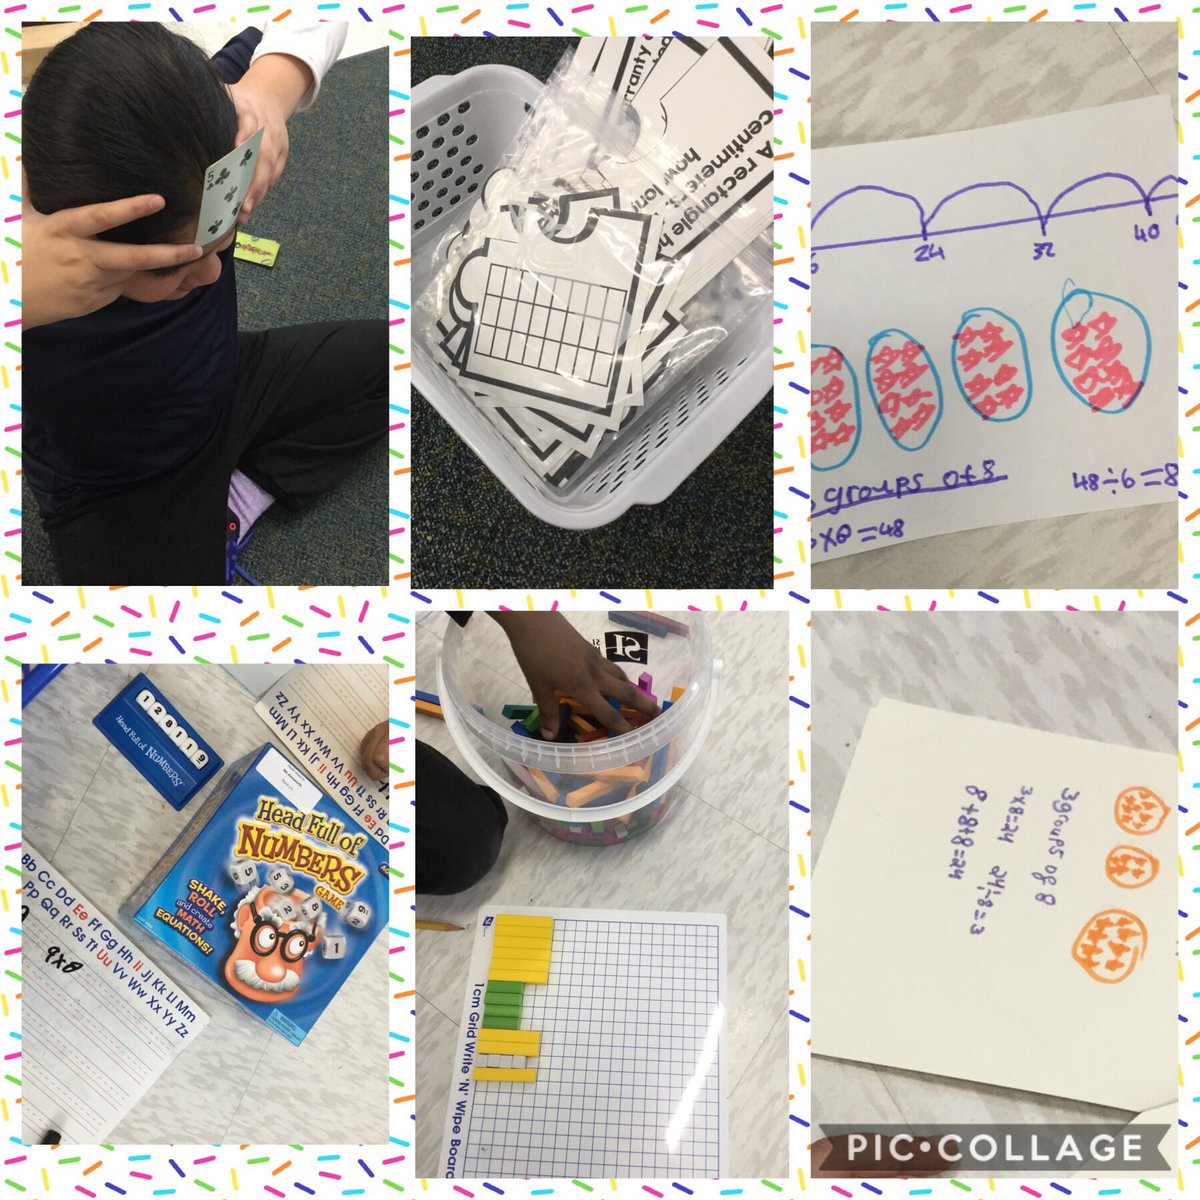 #grade3 super excited about learning multiplication through play! @DolsonPS #howlonghowmany? #circlesandstars #puzzlematch #headfullofnumbers #salute! @AllenCrew